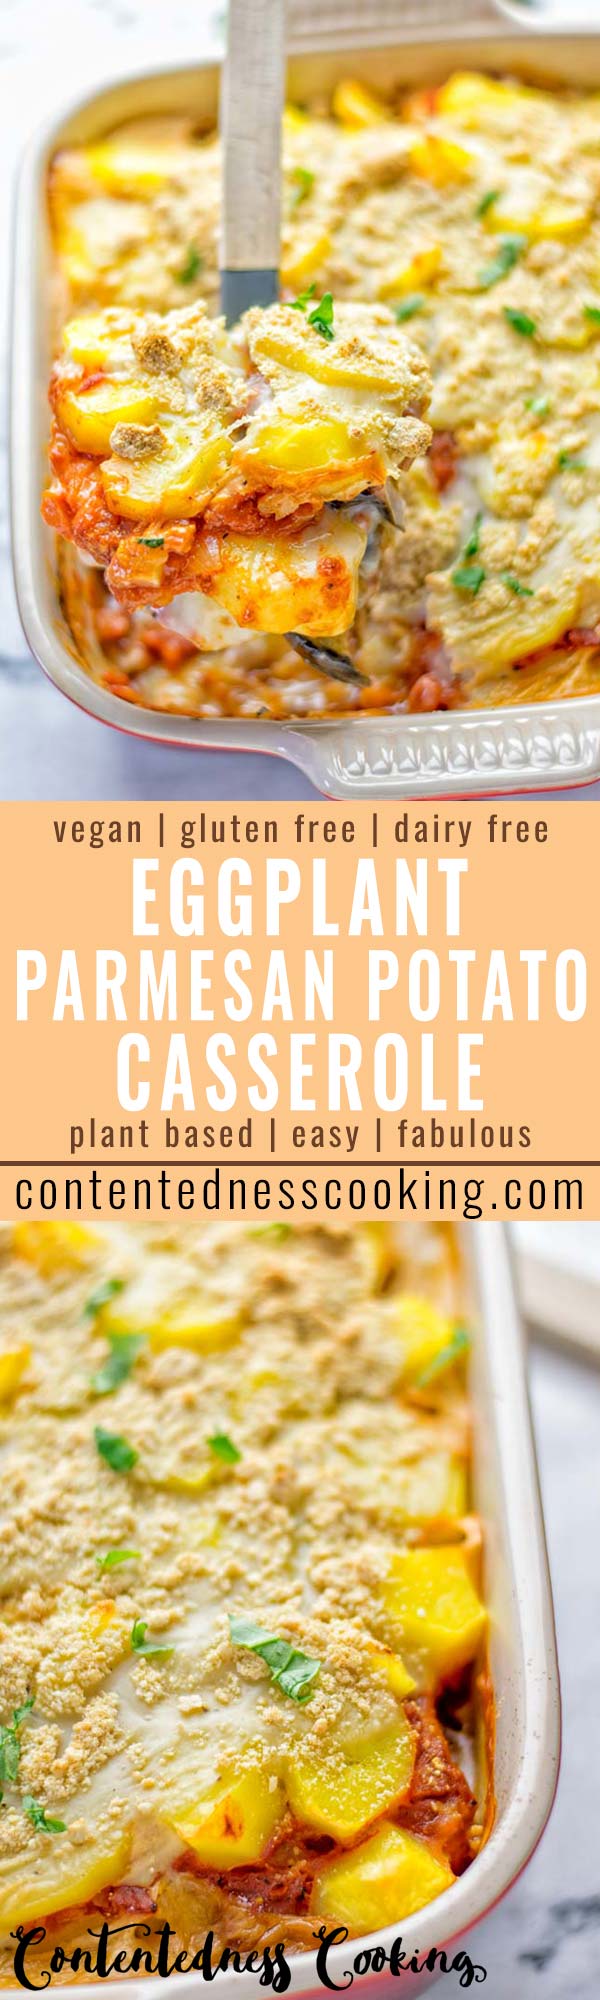 This Eggplant Parmesan Potato Casserole is entirely vegan, gluten free and the ultimate comfort food for everyone. It combines all the flavors of a classic eggplant parmesan with the twist of a comforting potato casserole. Perfect for dinner, lunch, meal prep and work lunch. #vegan #glutenfree #dairyfree #vegetarian #potatocasserole #eggplantparmesan #eggplantparmesanbaked #lunch #dinner #mealprep #worklunchideas #contentednesscooking